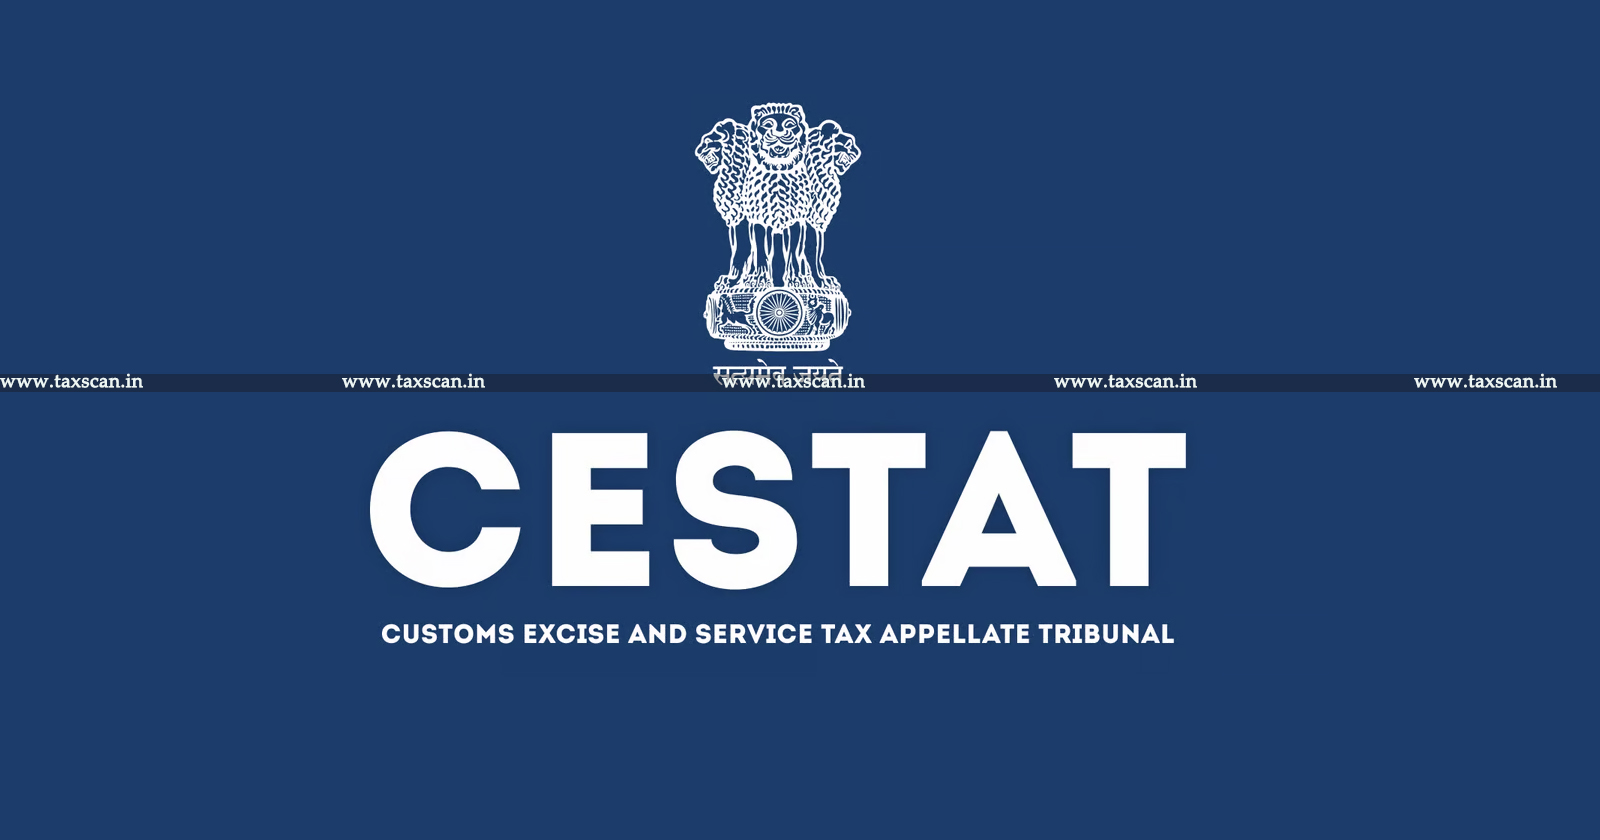 Demand of duty for clearing goods - Central Excise - report of Deputy Director - CESTAT - taxscan